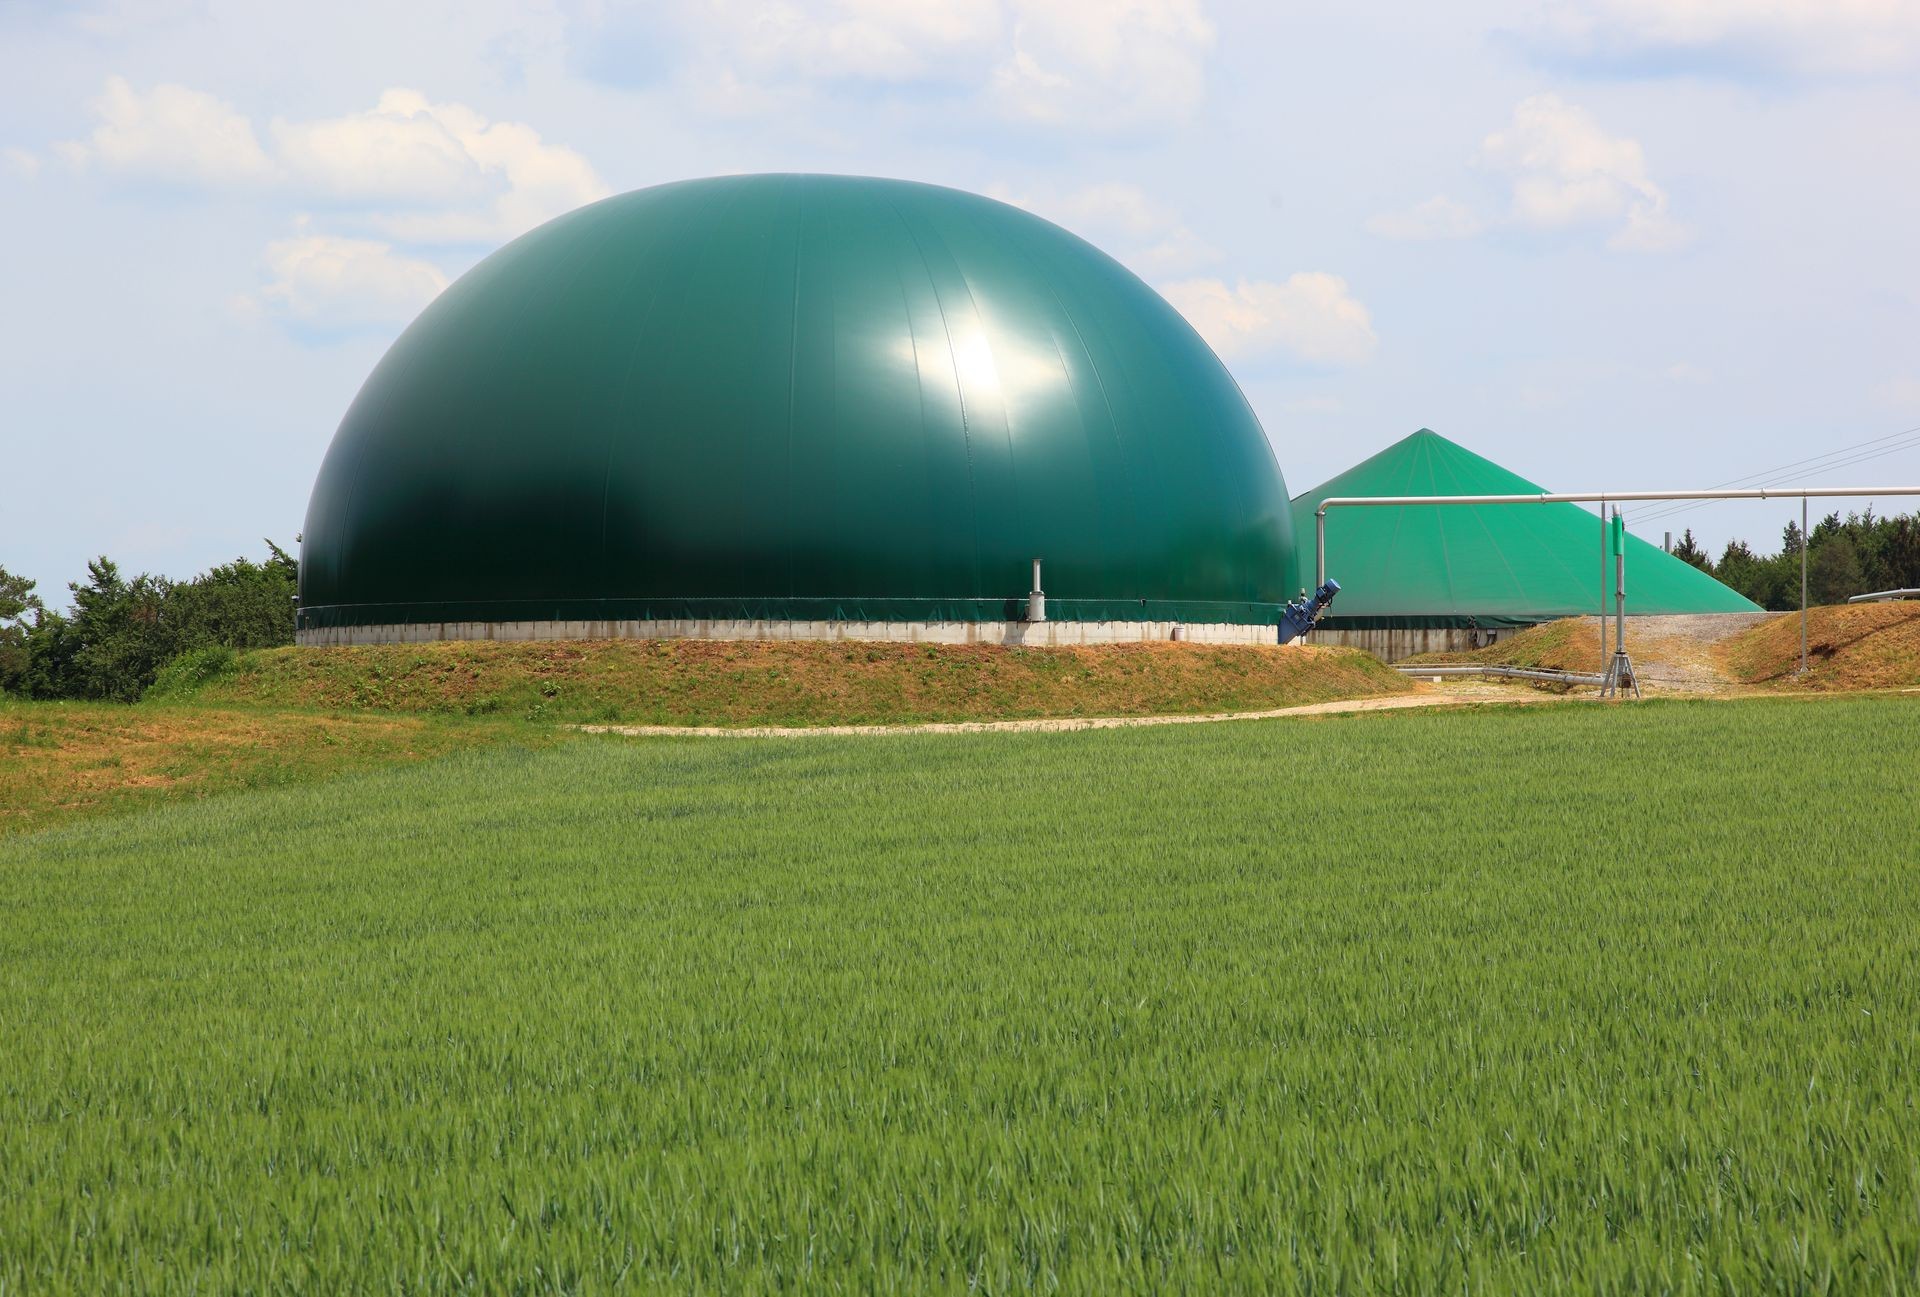 Biogas production, Anaerobic digestion, collection of processes by which microorganisms break down biodegradable material in the absence of oxygen